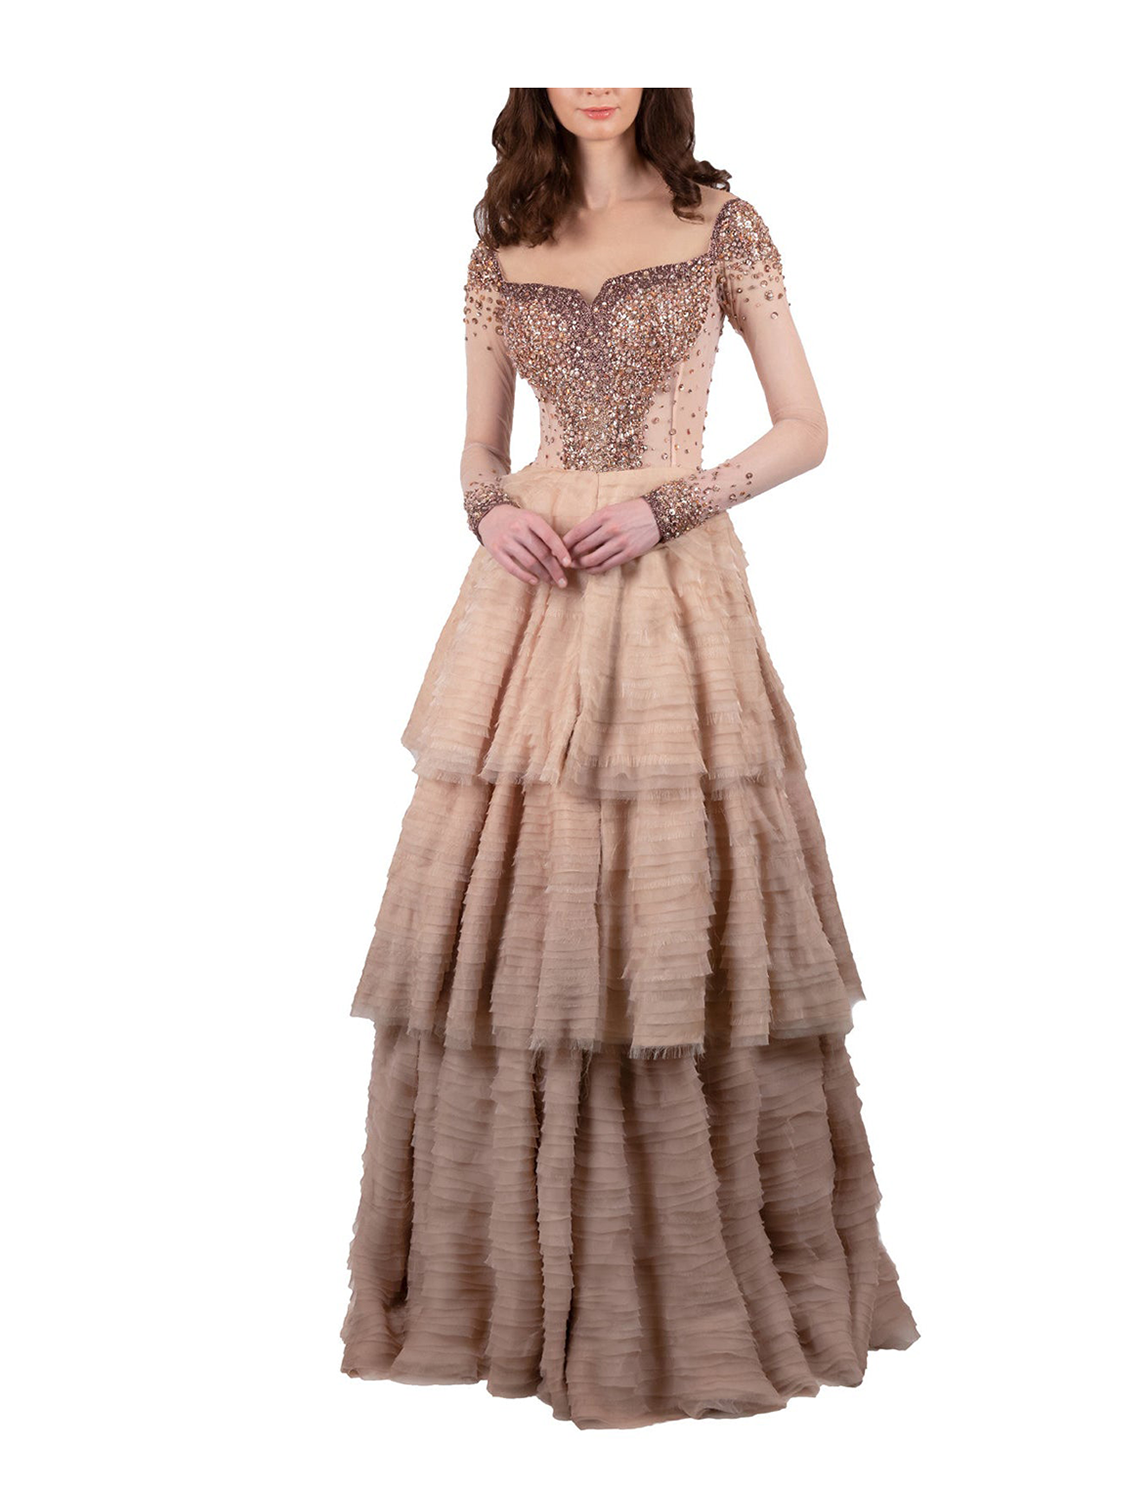 Crystal Mink Gown